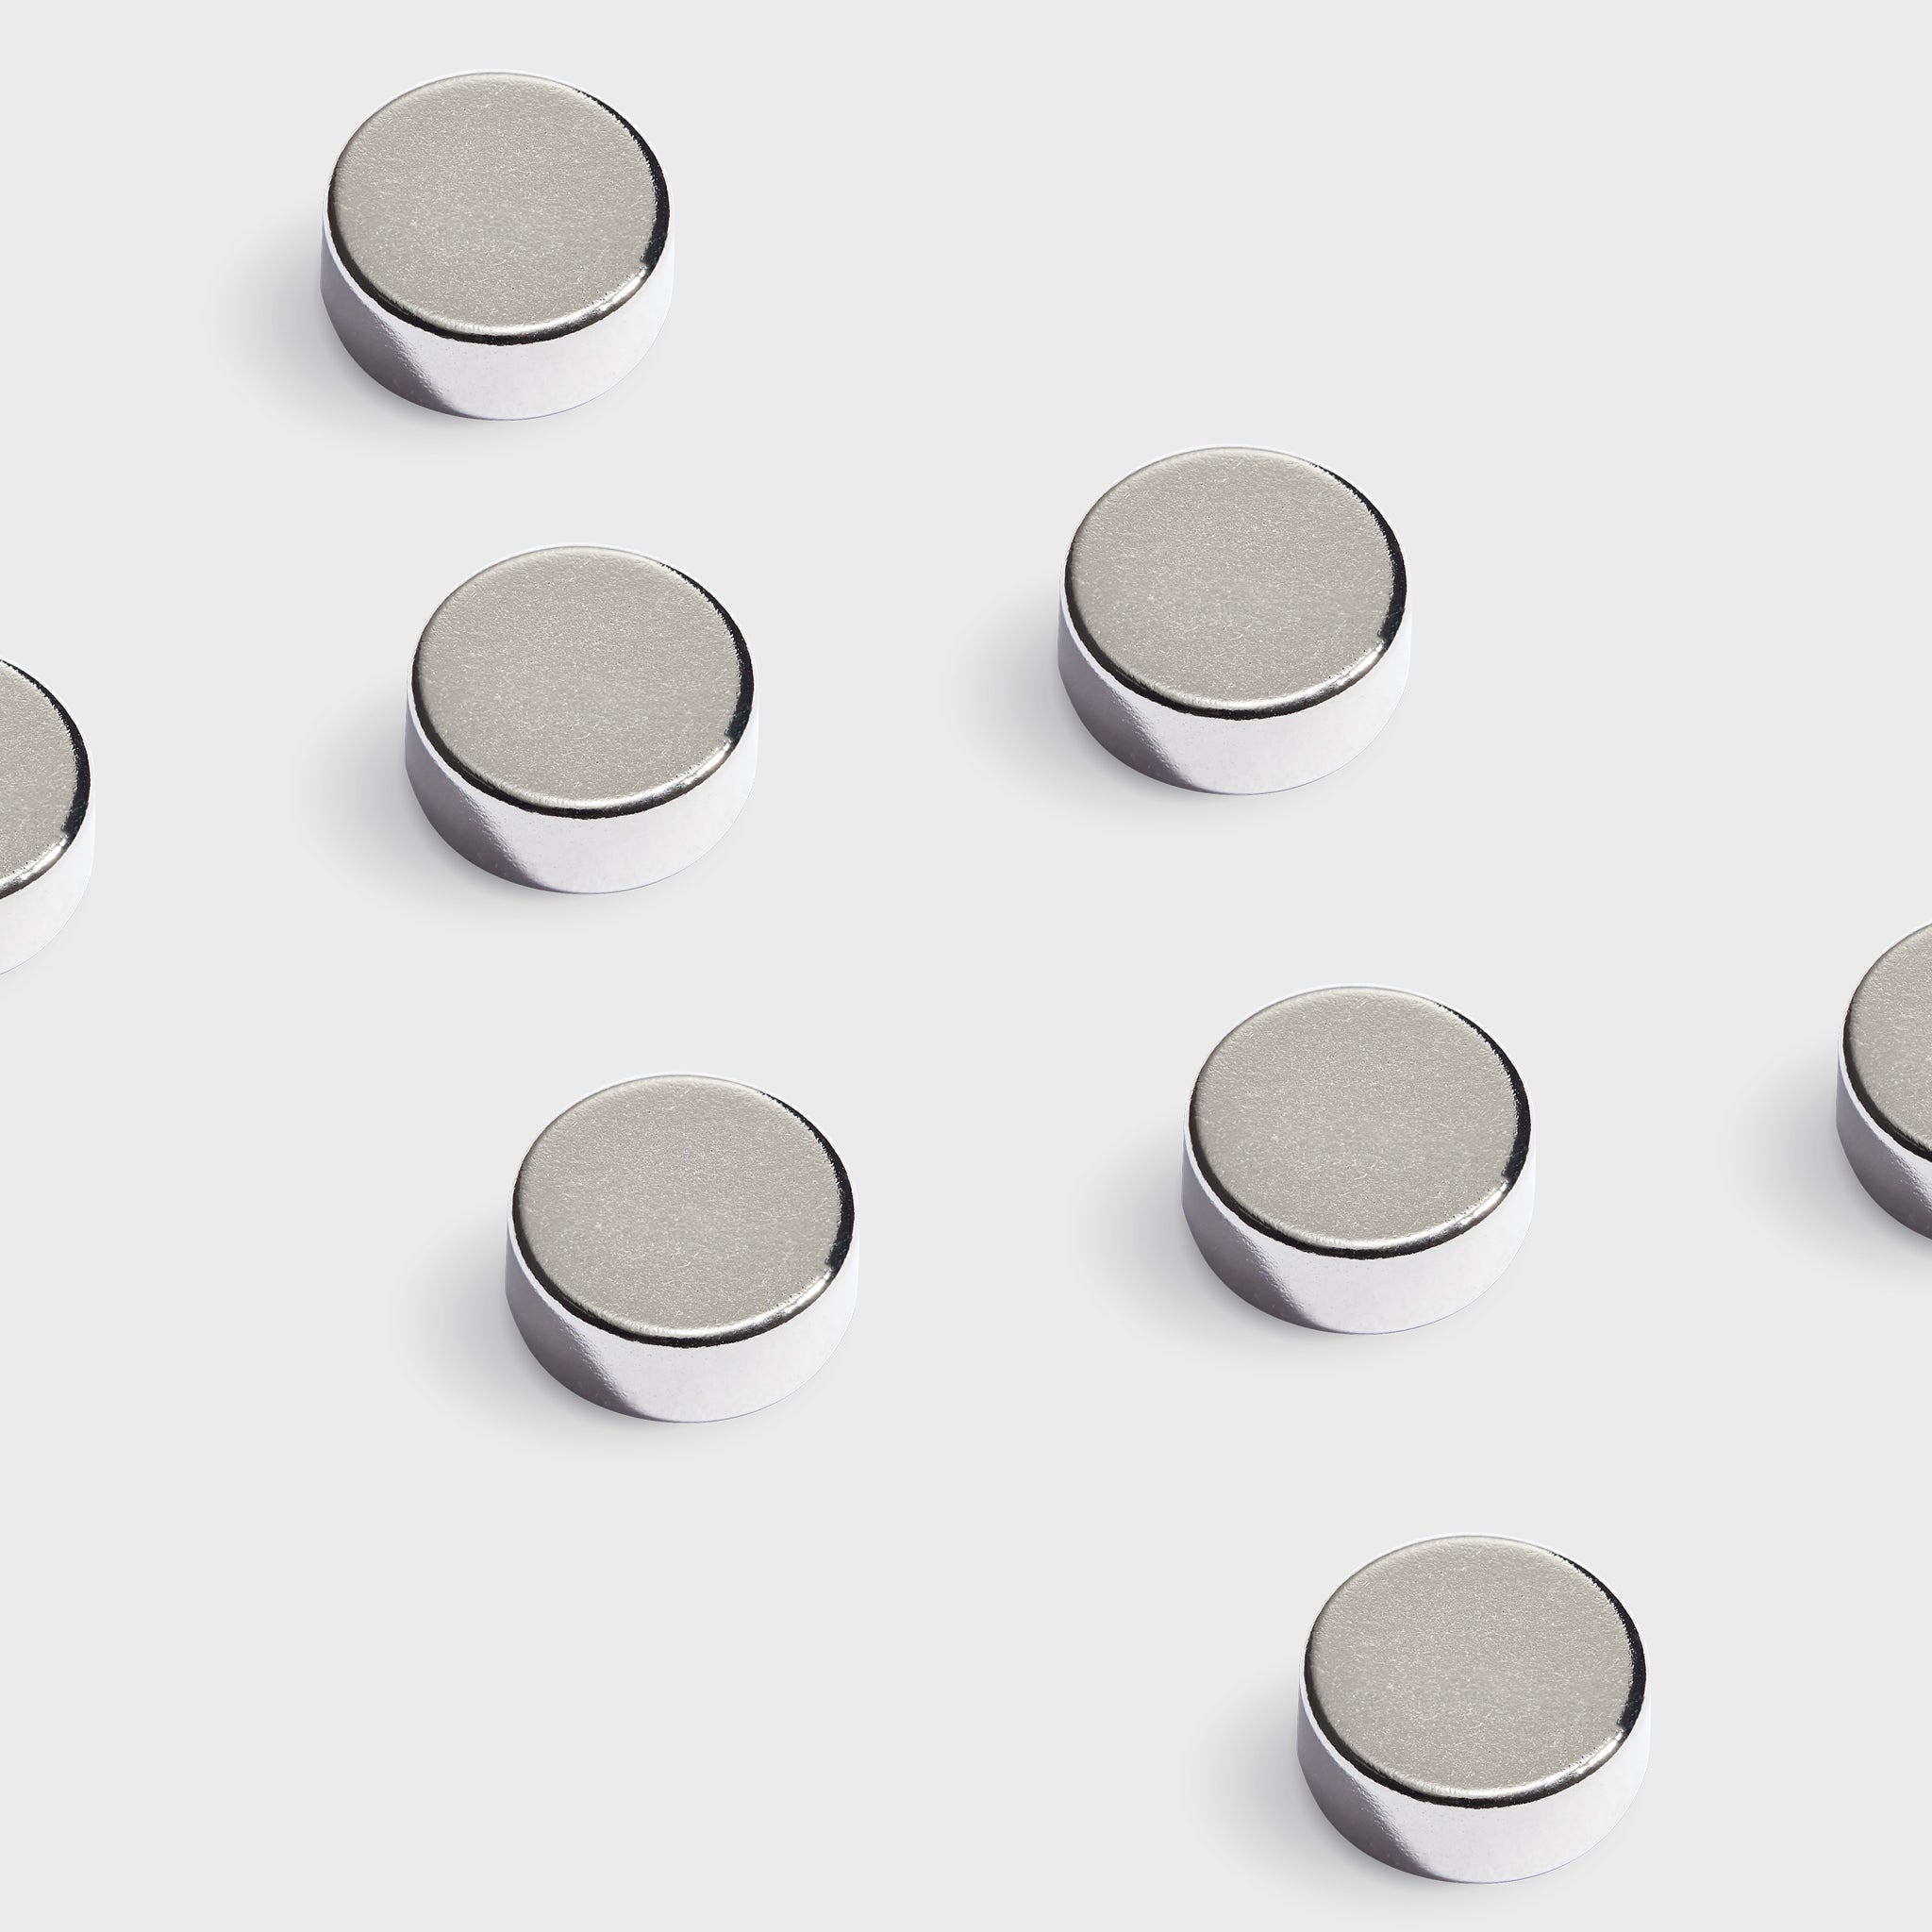 THICK 3/4 inch BEVELED EDGE C8 Strong Ceramic Magnets ONLY for 1 Inch  Buttons - 100 - Button Boy